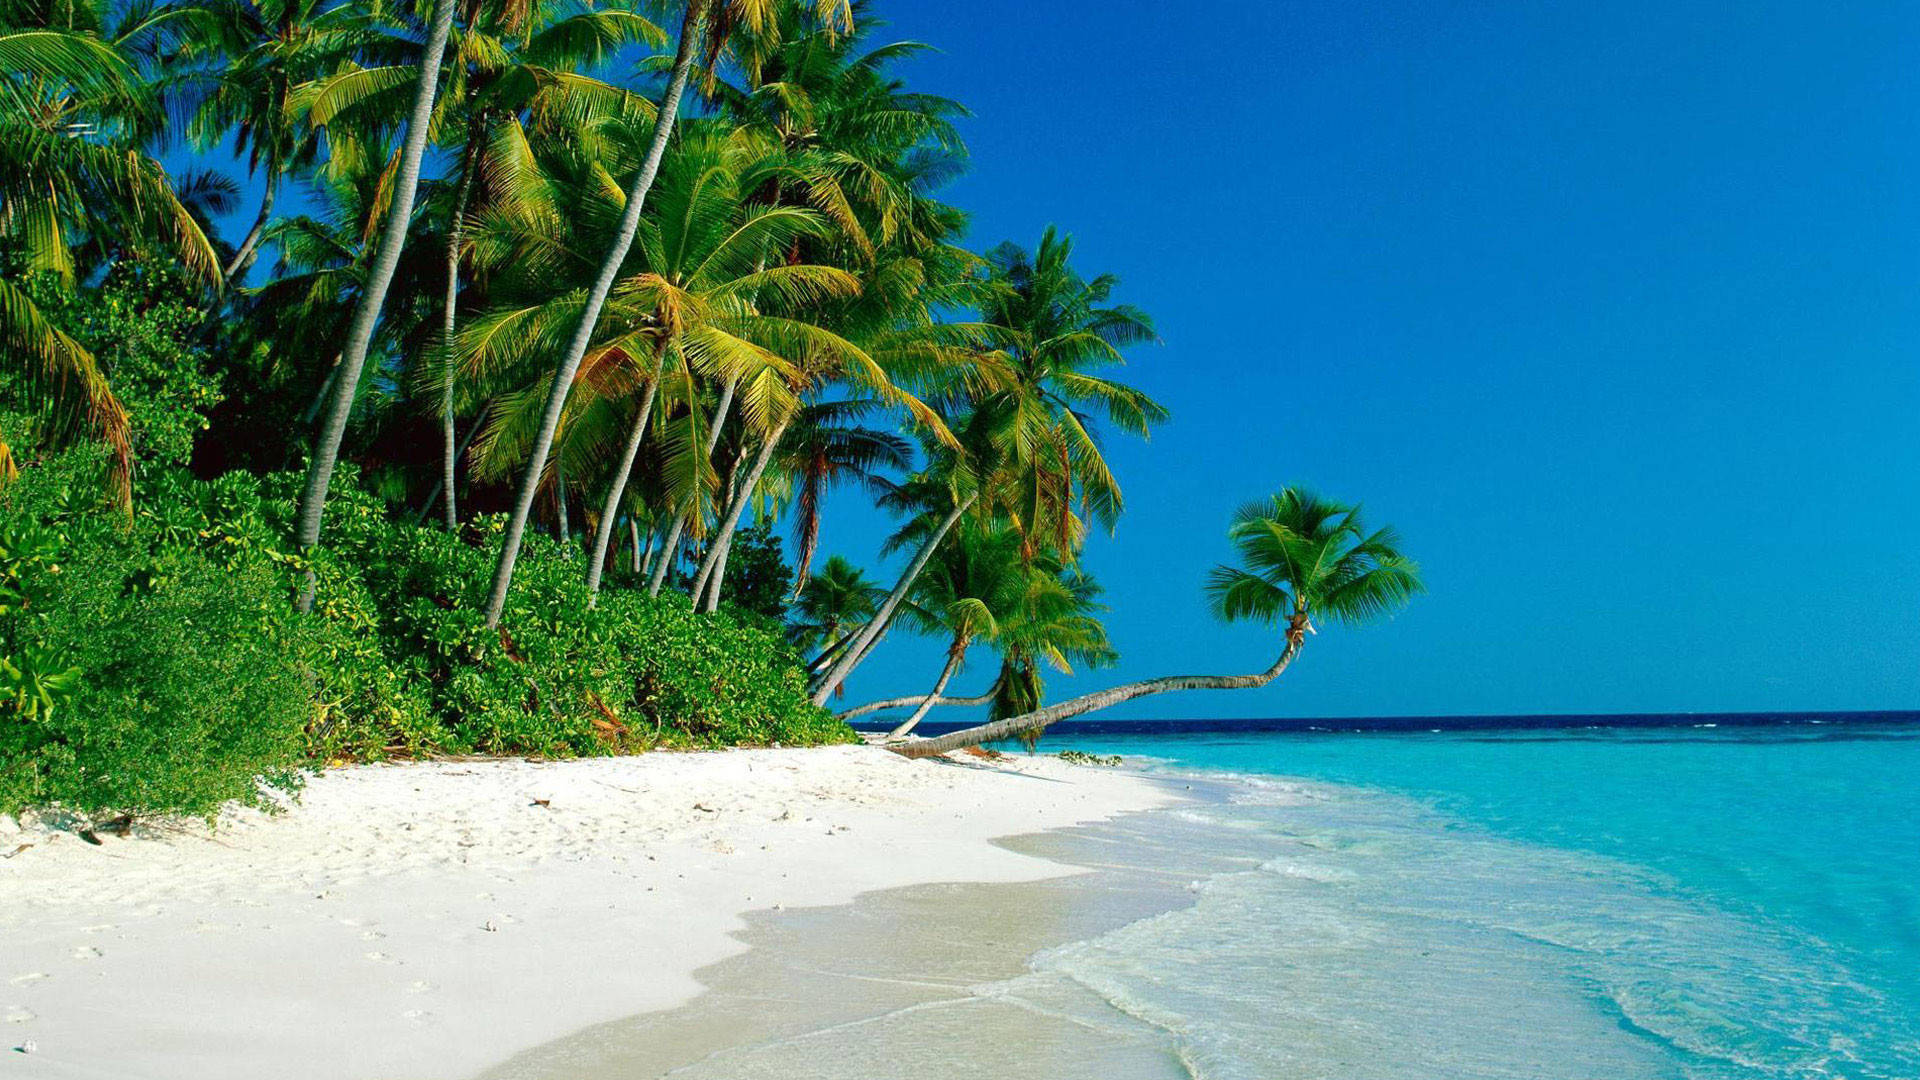 Bushes And Coconut Trees Lined Up On White Sand Picture